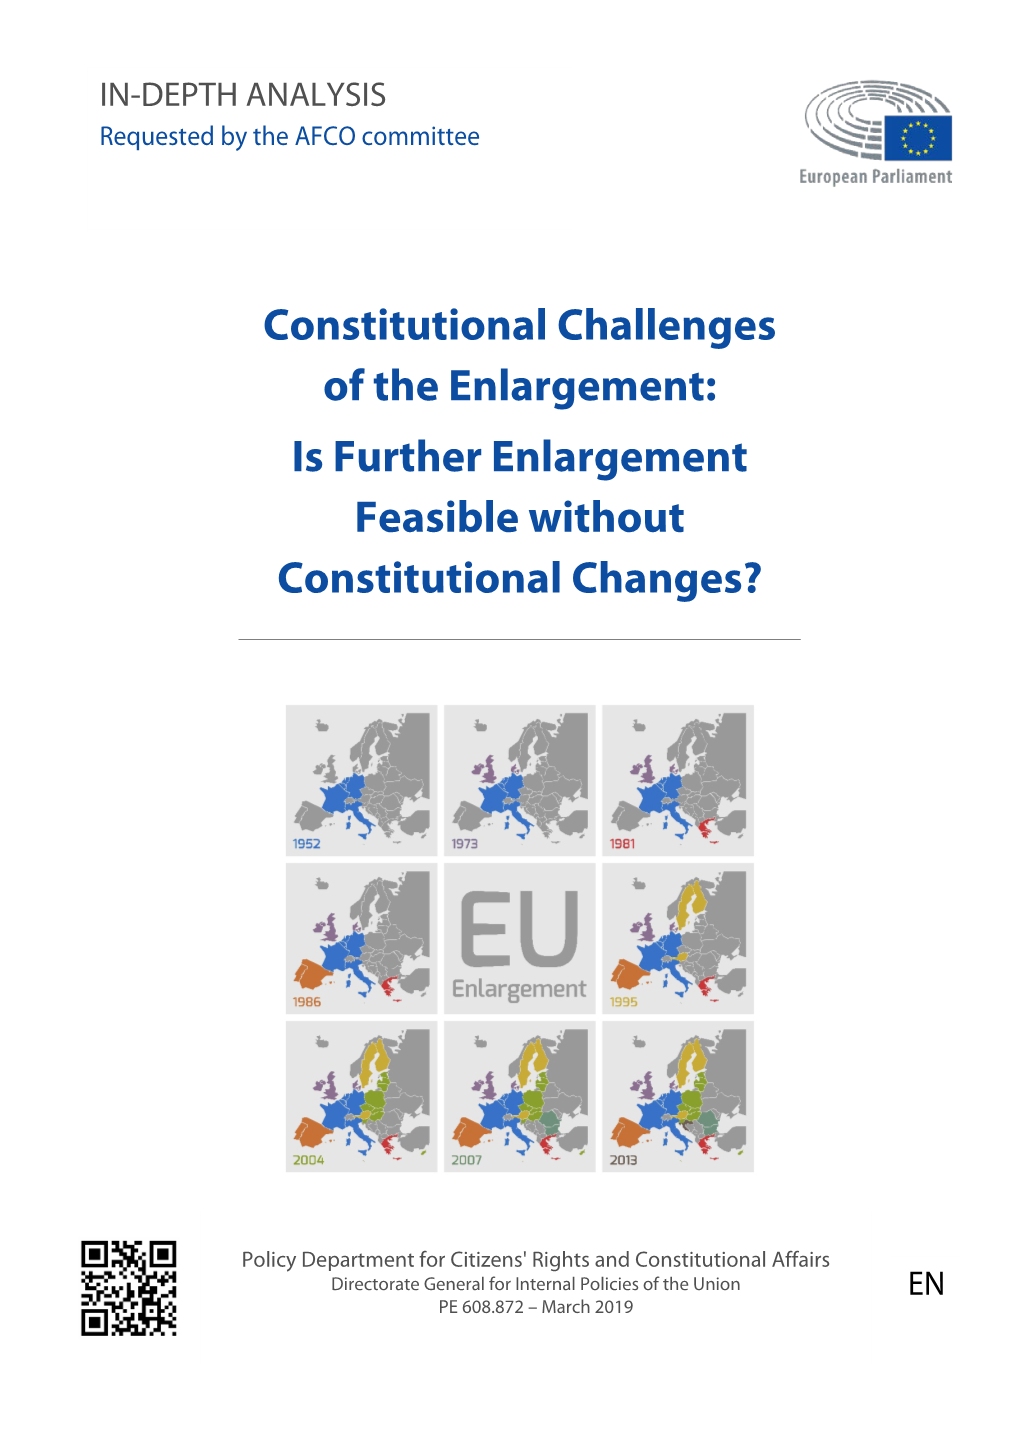 Constitutional Challenges of the Enlargement: Is Further Enlargement Feasible Without Constitutional Changes?